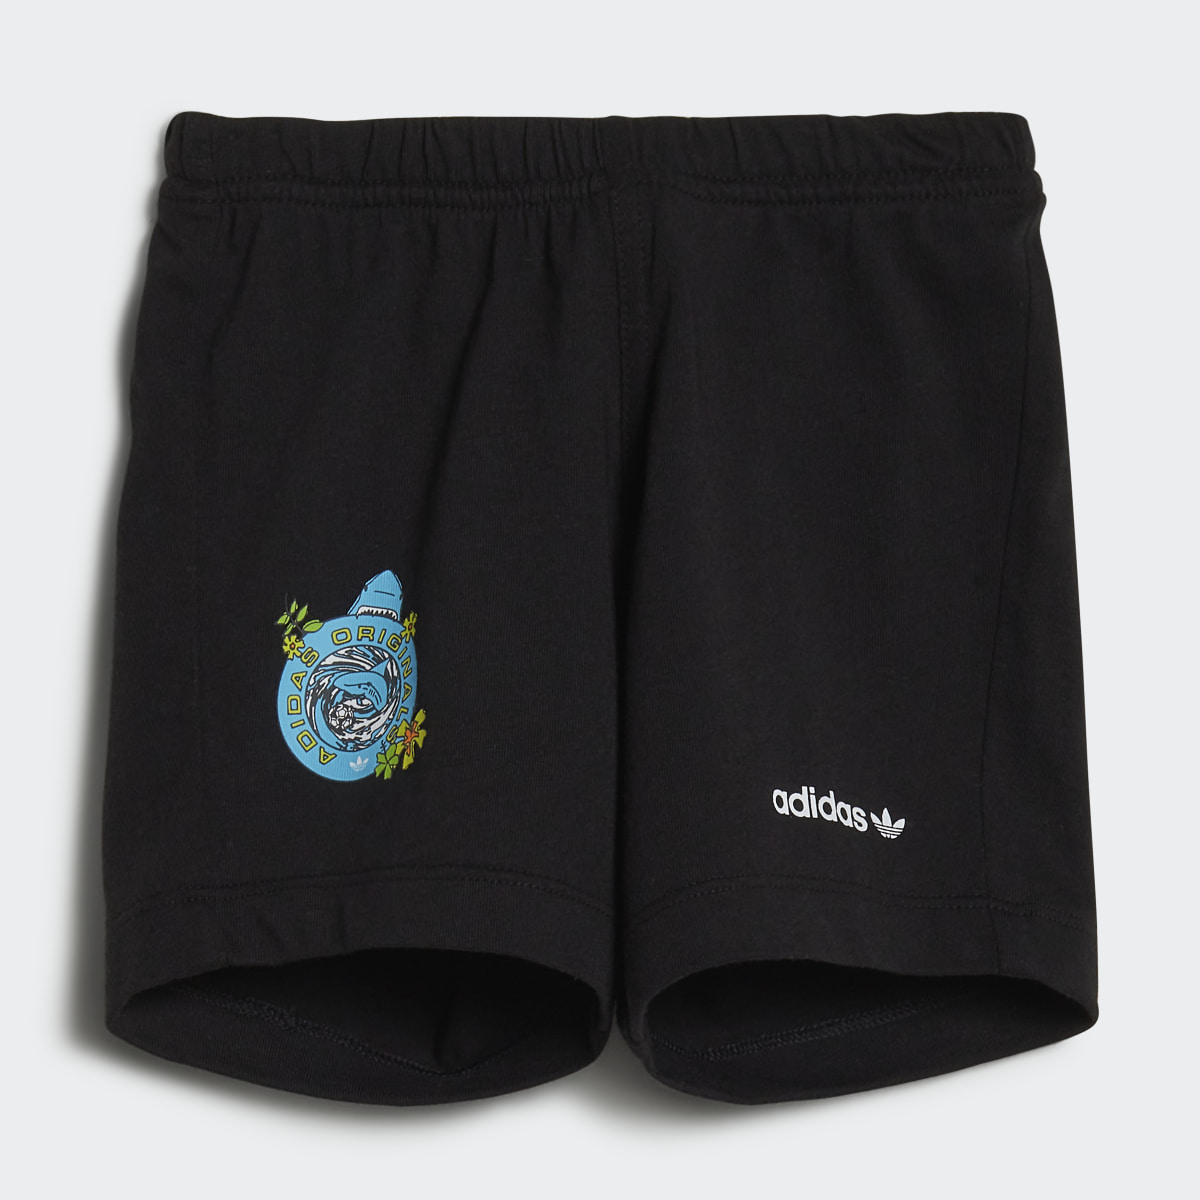 Adidas Graphic Stoked Beach Shorts-and-Tee Set. 5